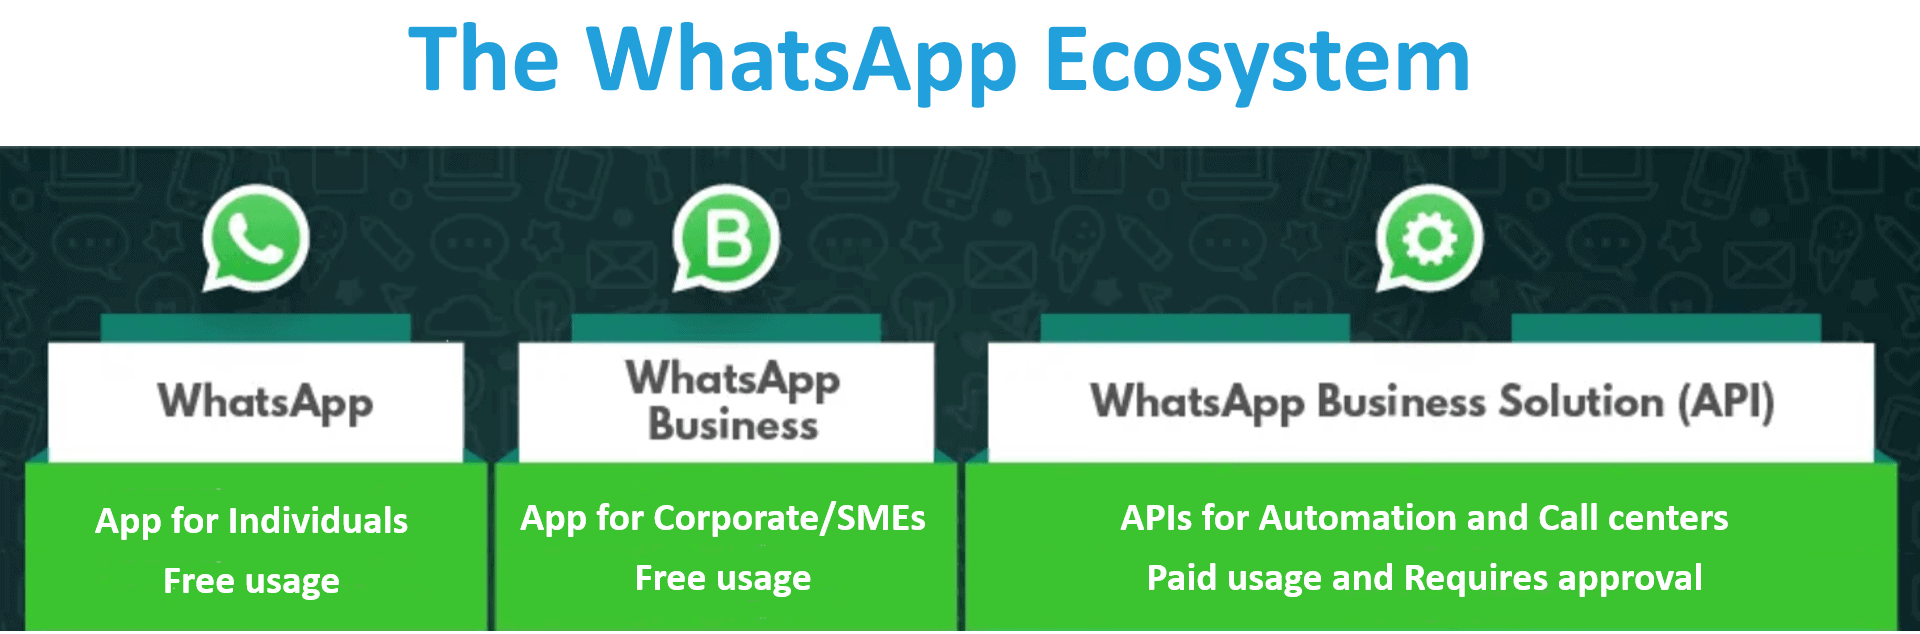 what is business model of whatsapp